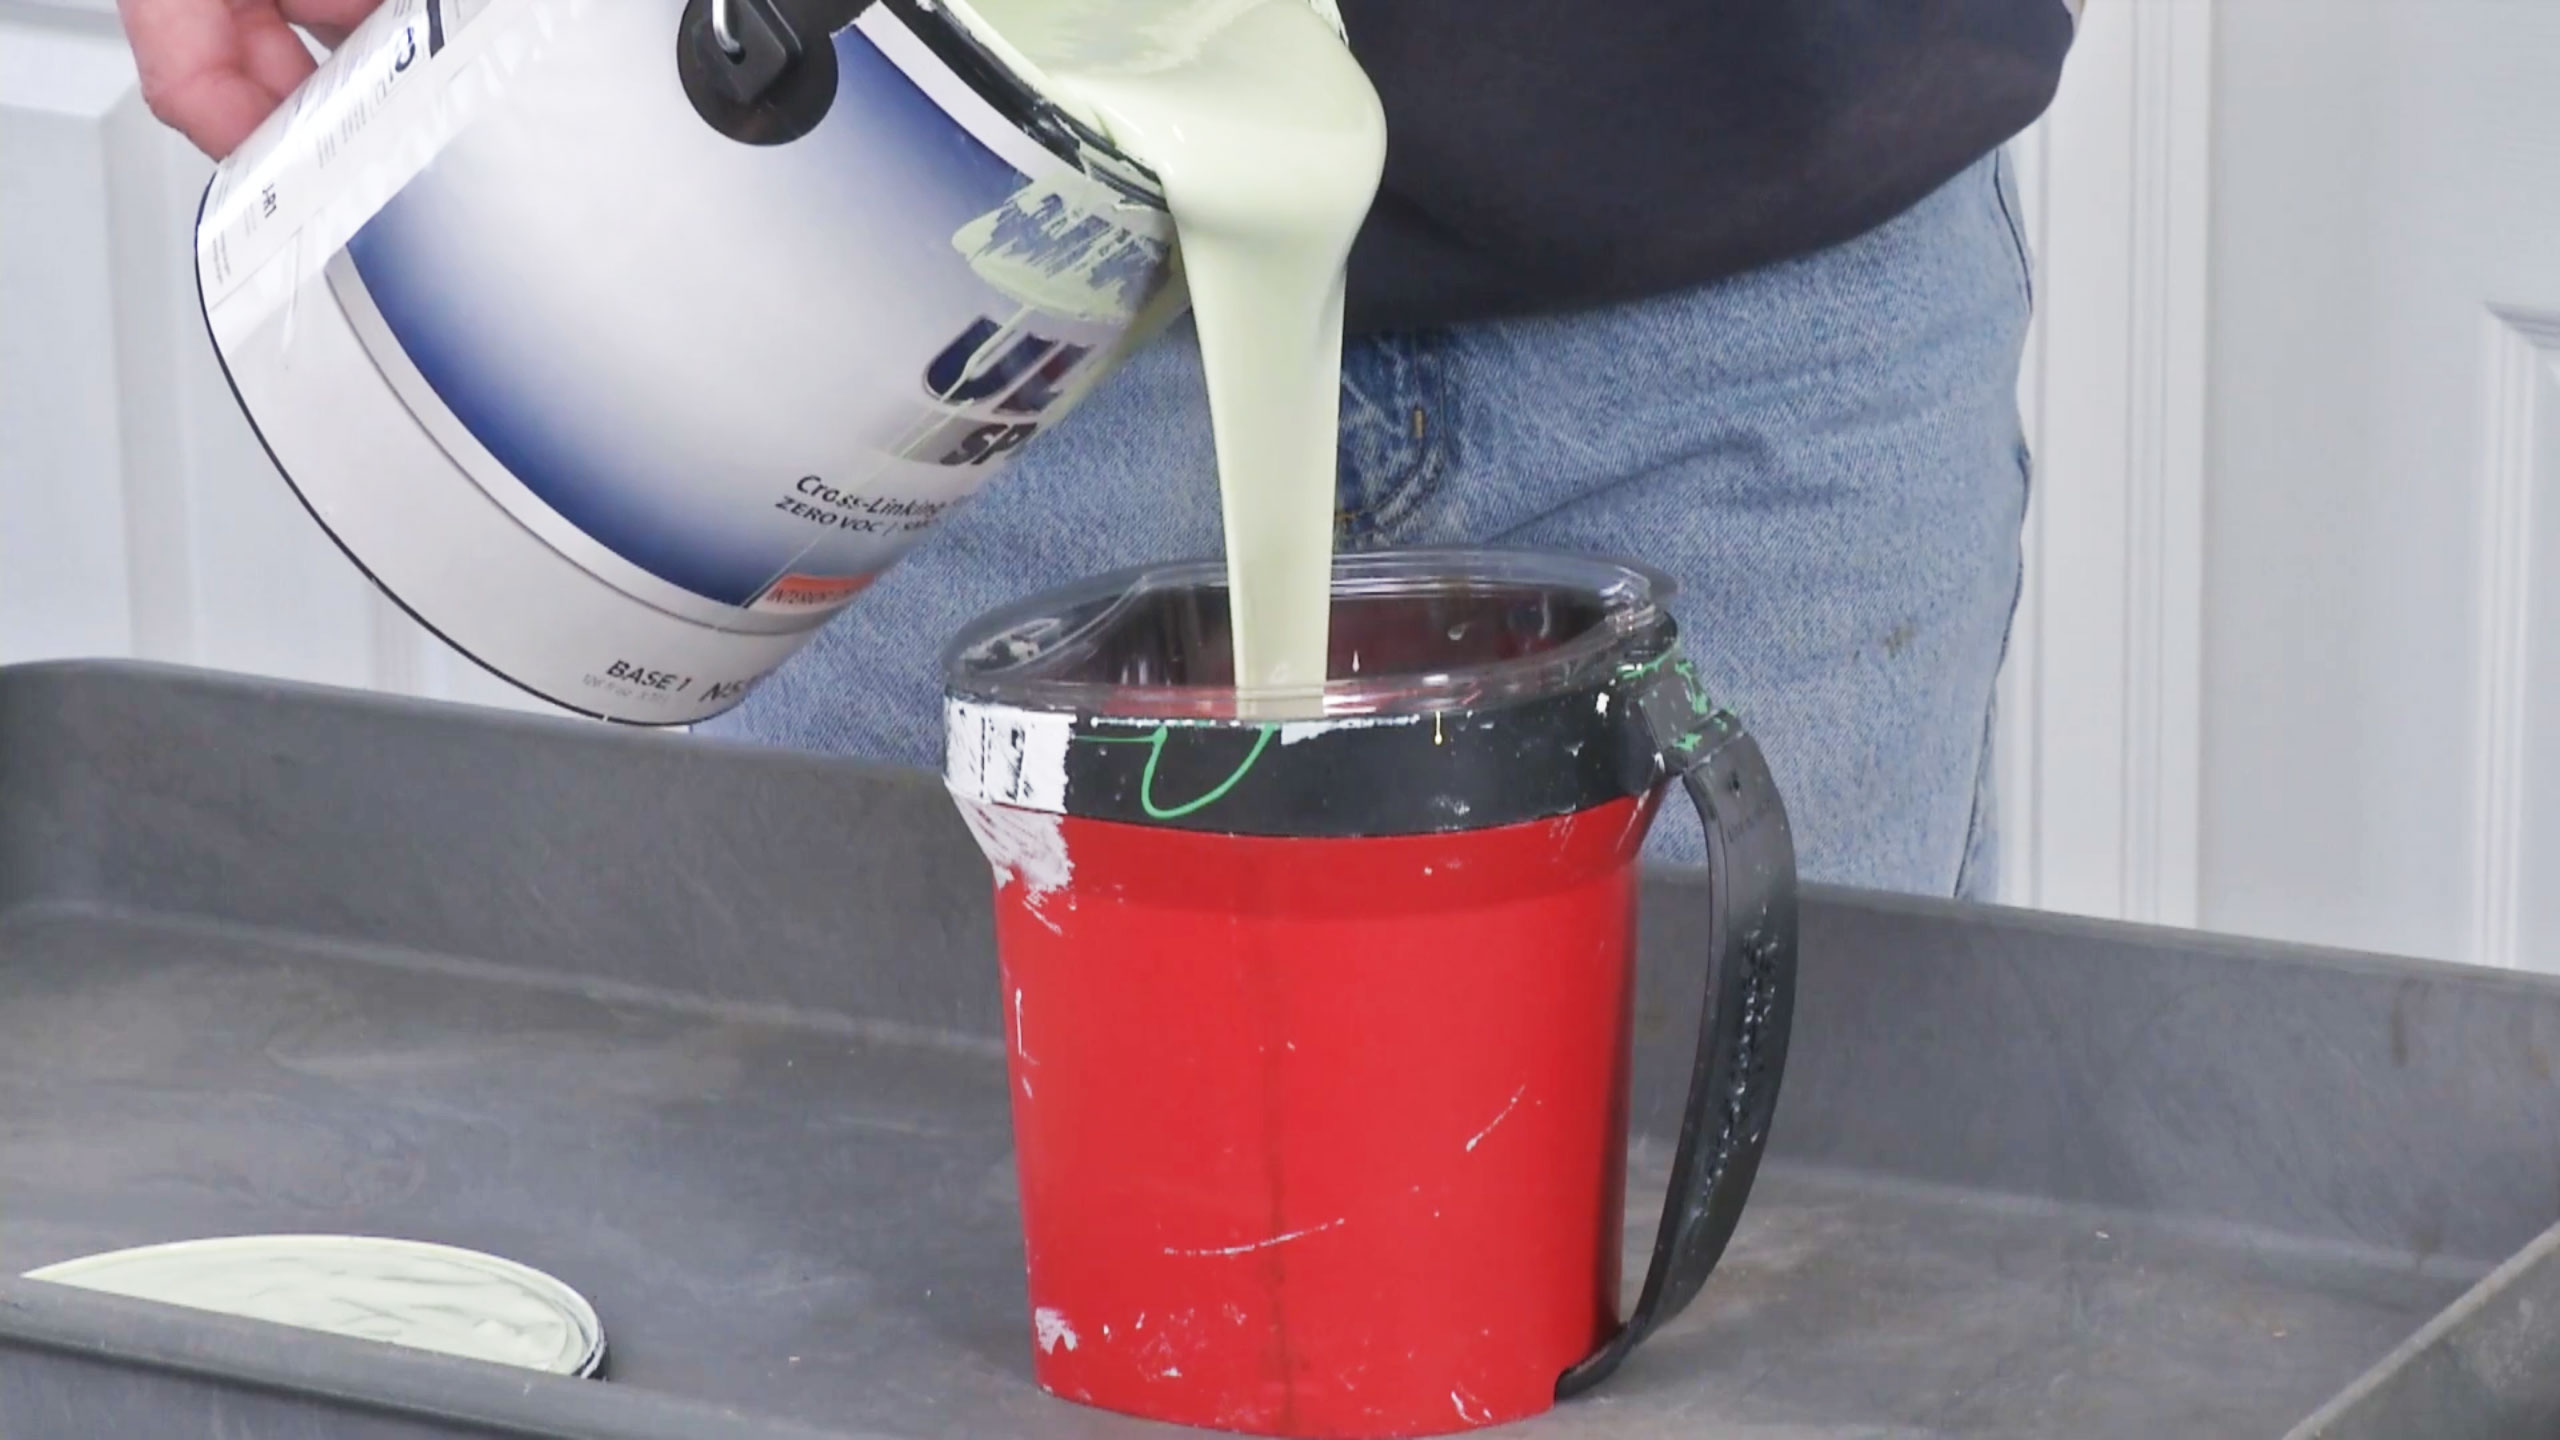 Paint is poured into red paint pail